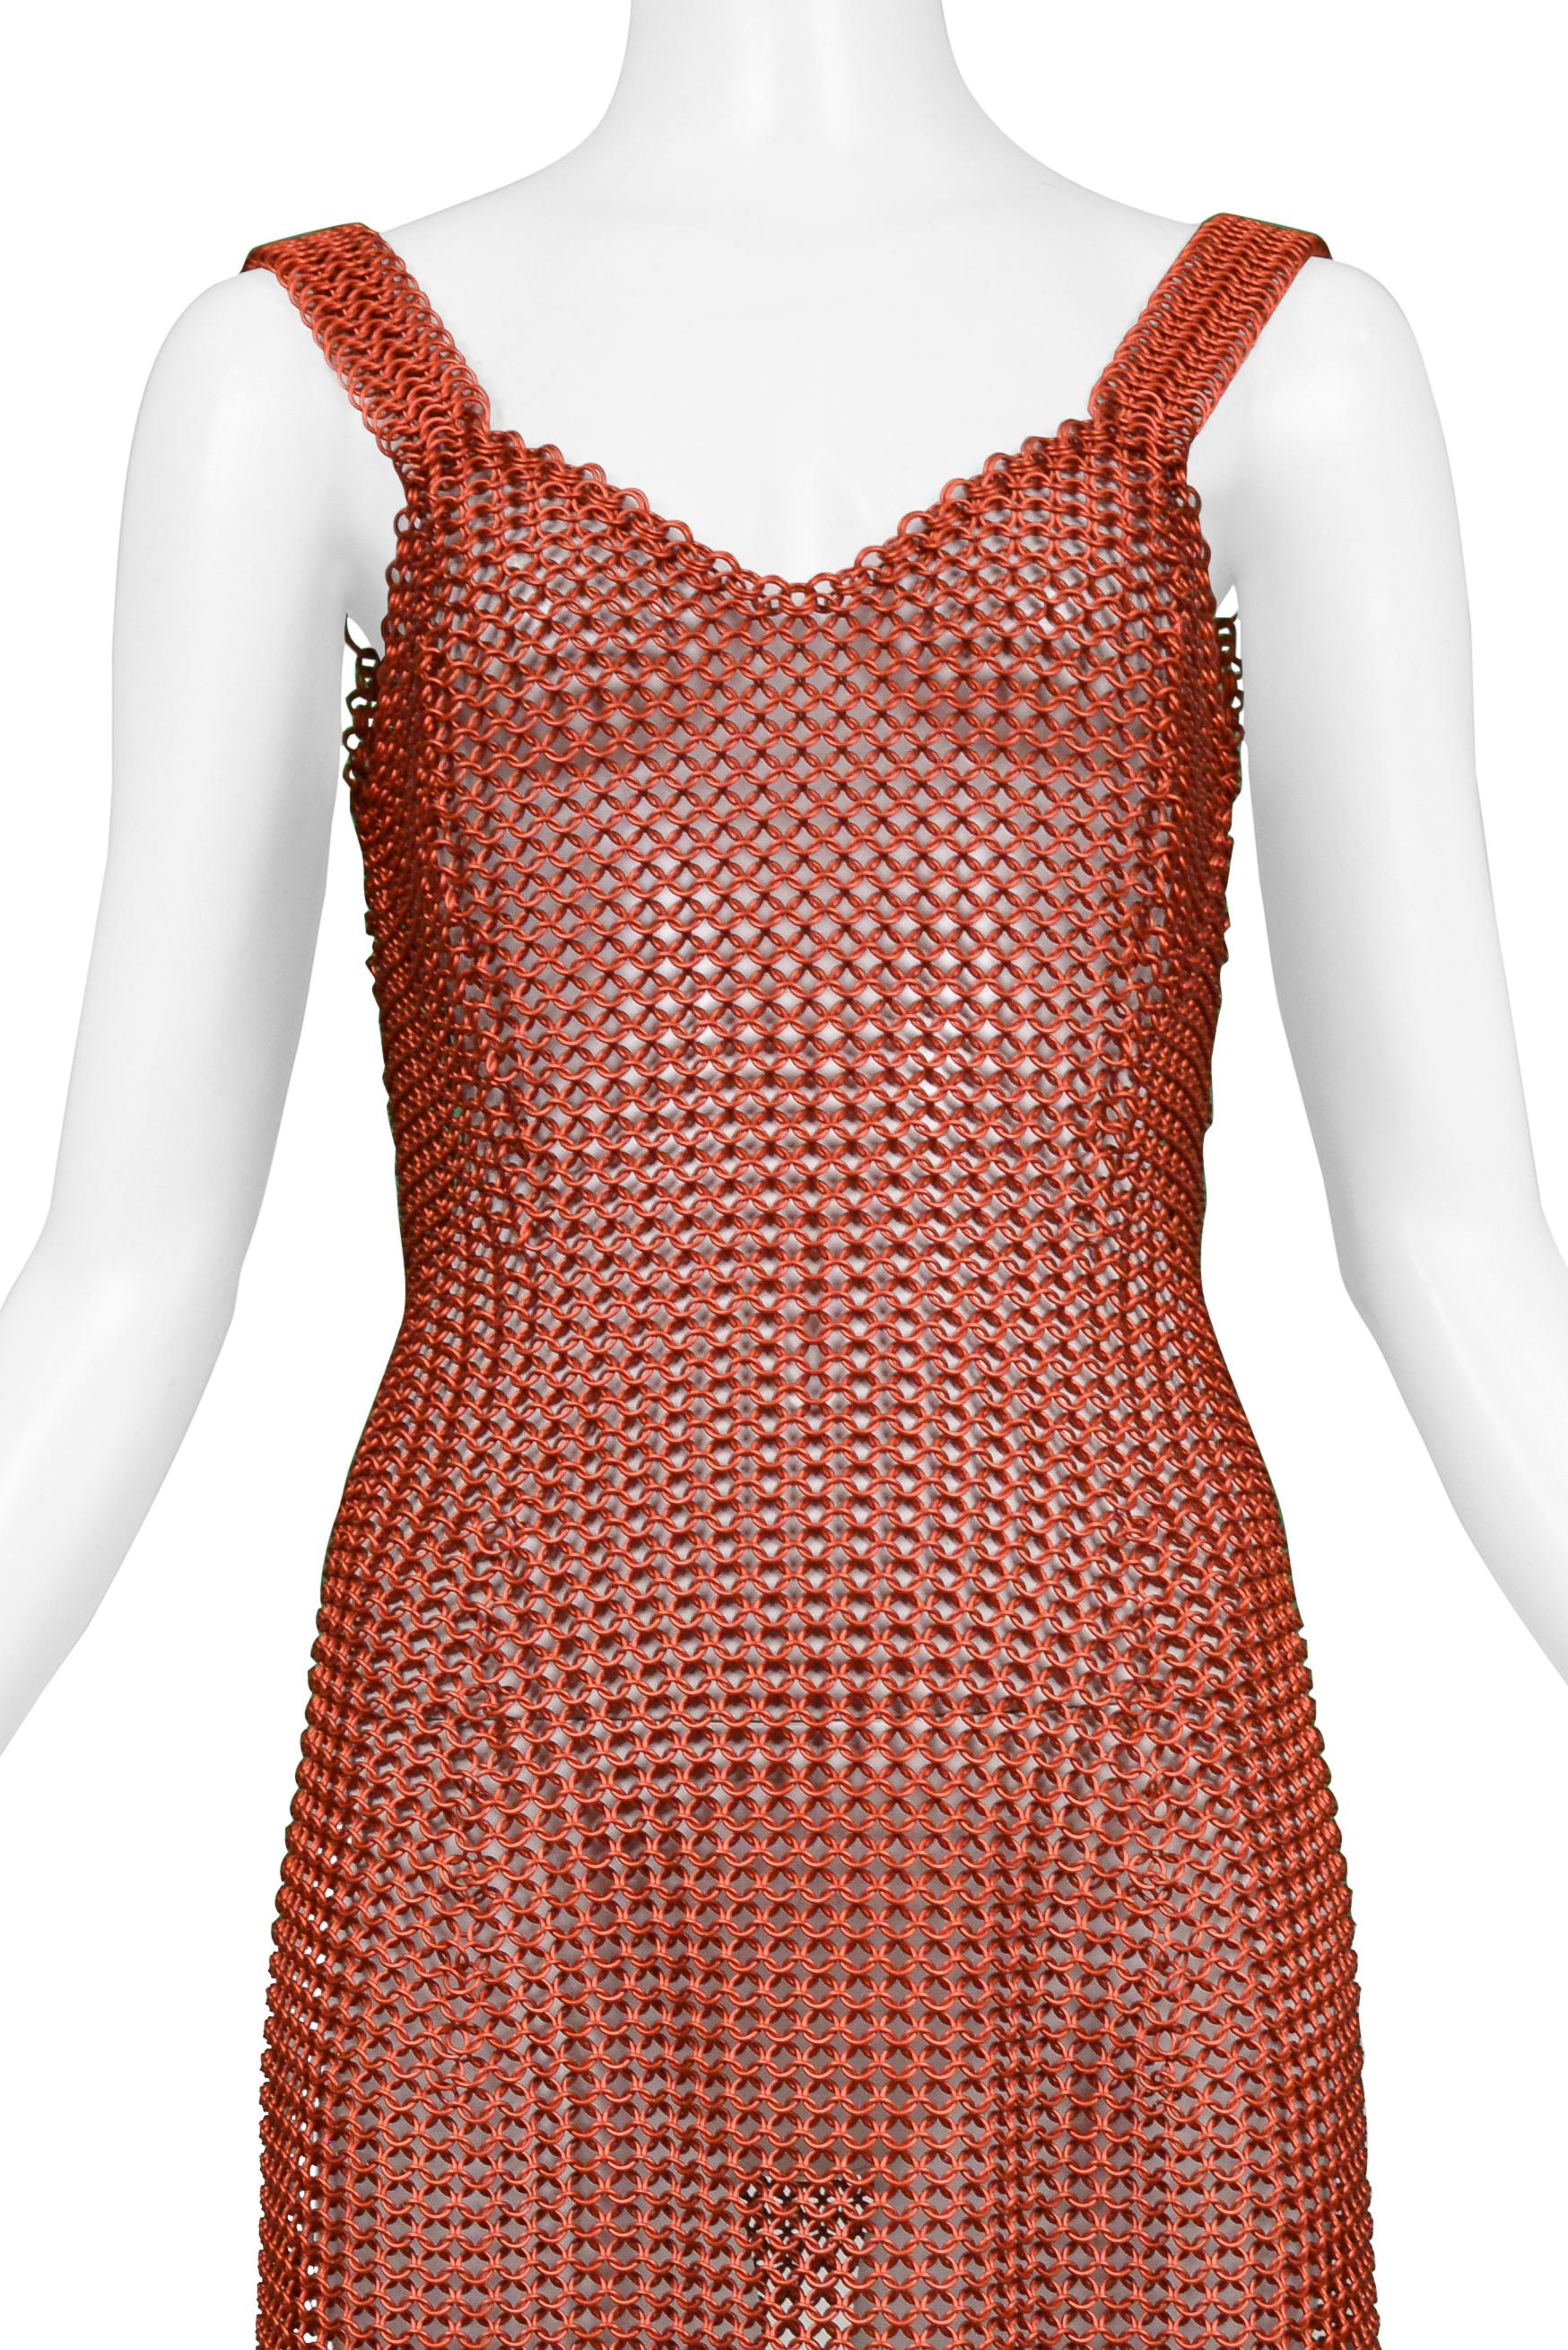 Todd Oldham Red Metal Chain Link Dress 1995 In Excellent Condition For Sale In Los Angeles, CA